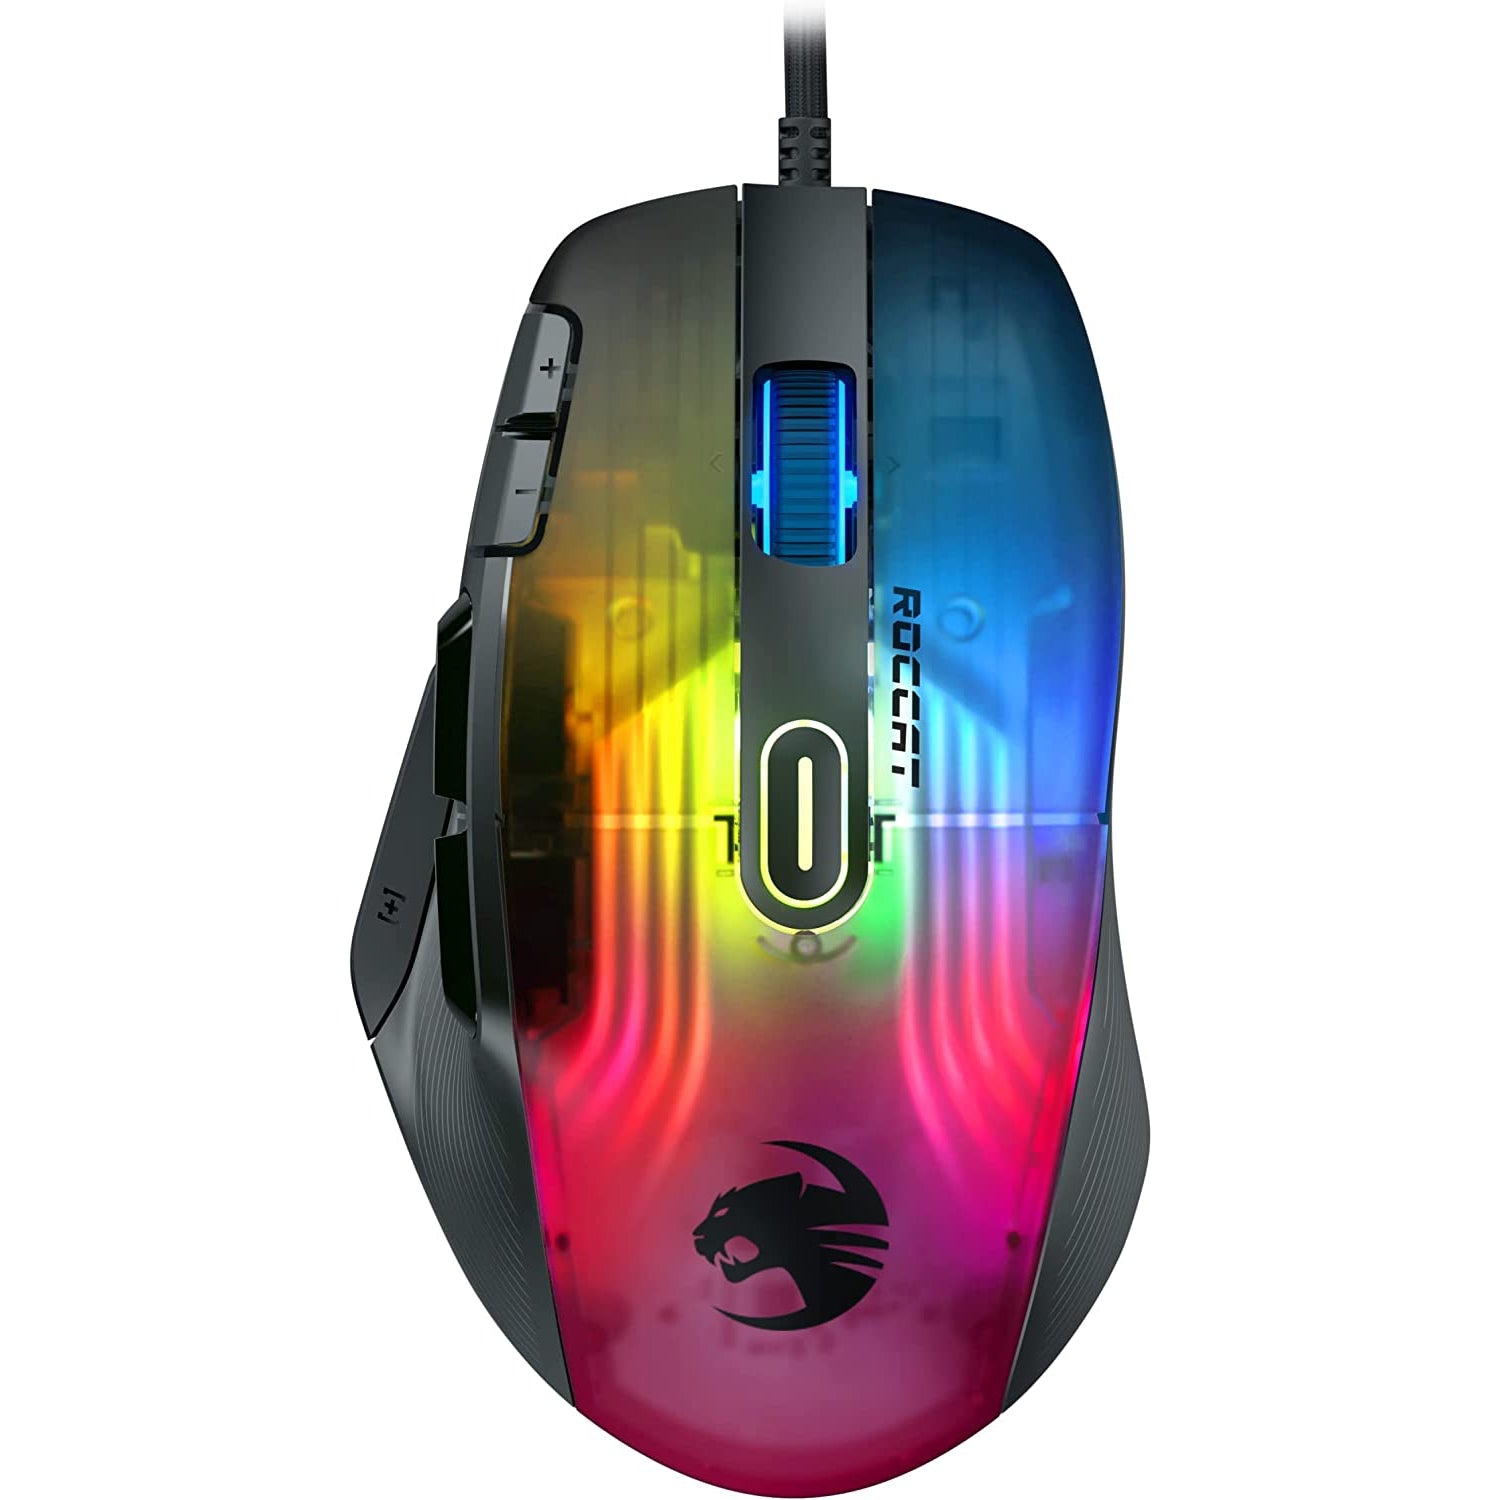 Roccat Kone XP AIMO Wired Gaming Mouse